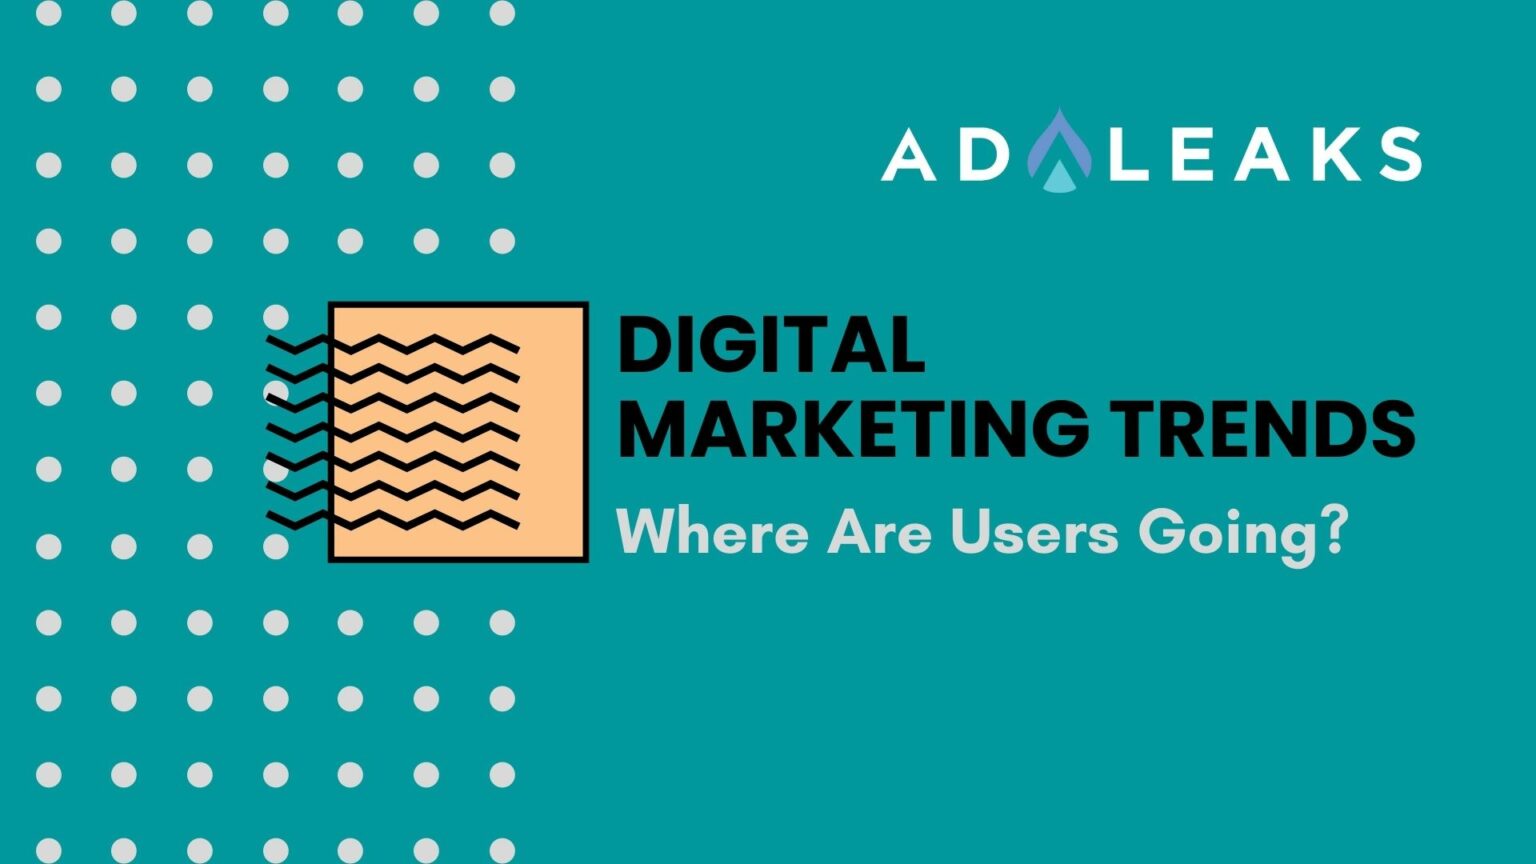 Digital Marketing Trends: Where are Users Going?